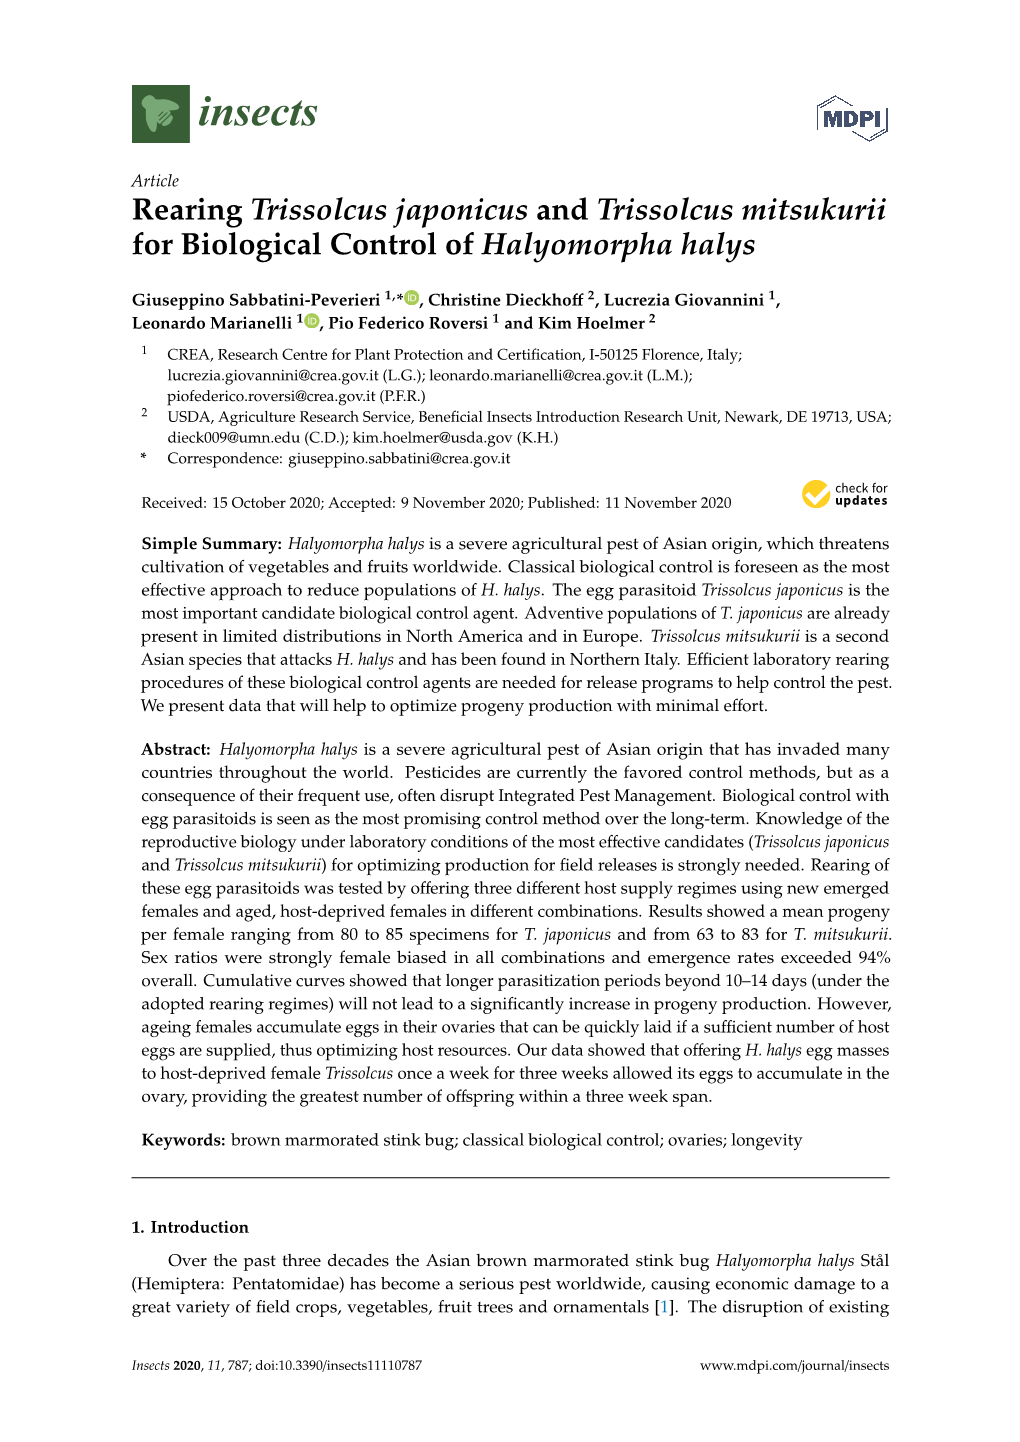 Rearing Trissolcus Japonicus and Trissolcus Mitsukurii for Biological Control of Halyomorpha Halys